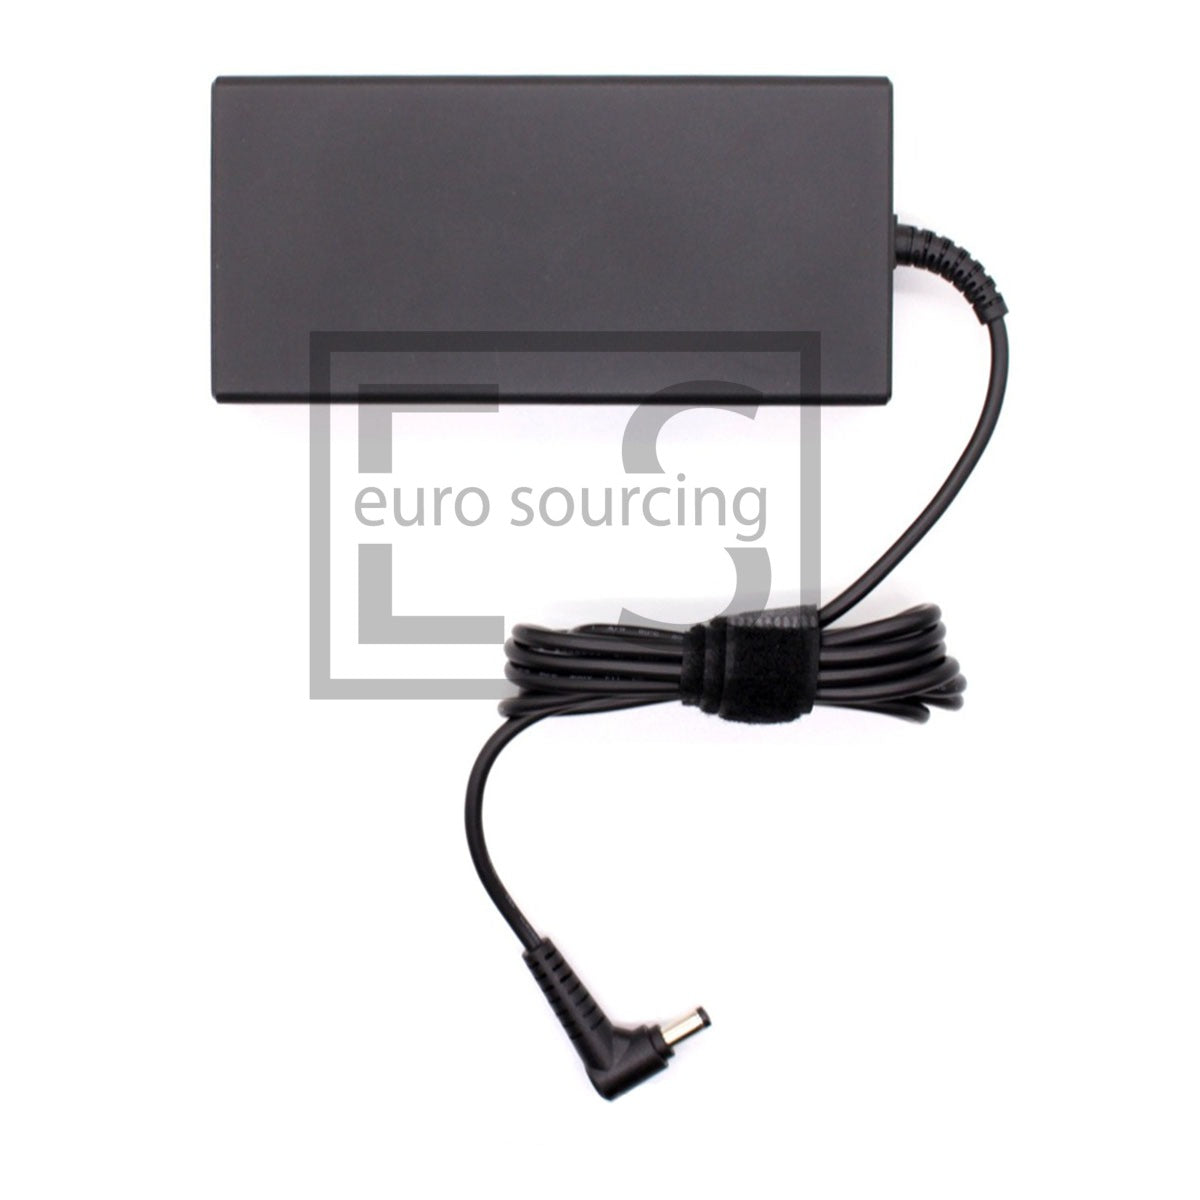 Genuine Delta 180W 19.5V 9.23A 5.5MM x 2.5MM Gaming Laptop Adapter Power Supply Compatible With Razer Blade RZ09-0270